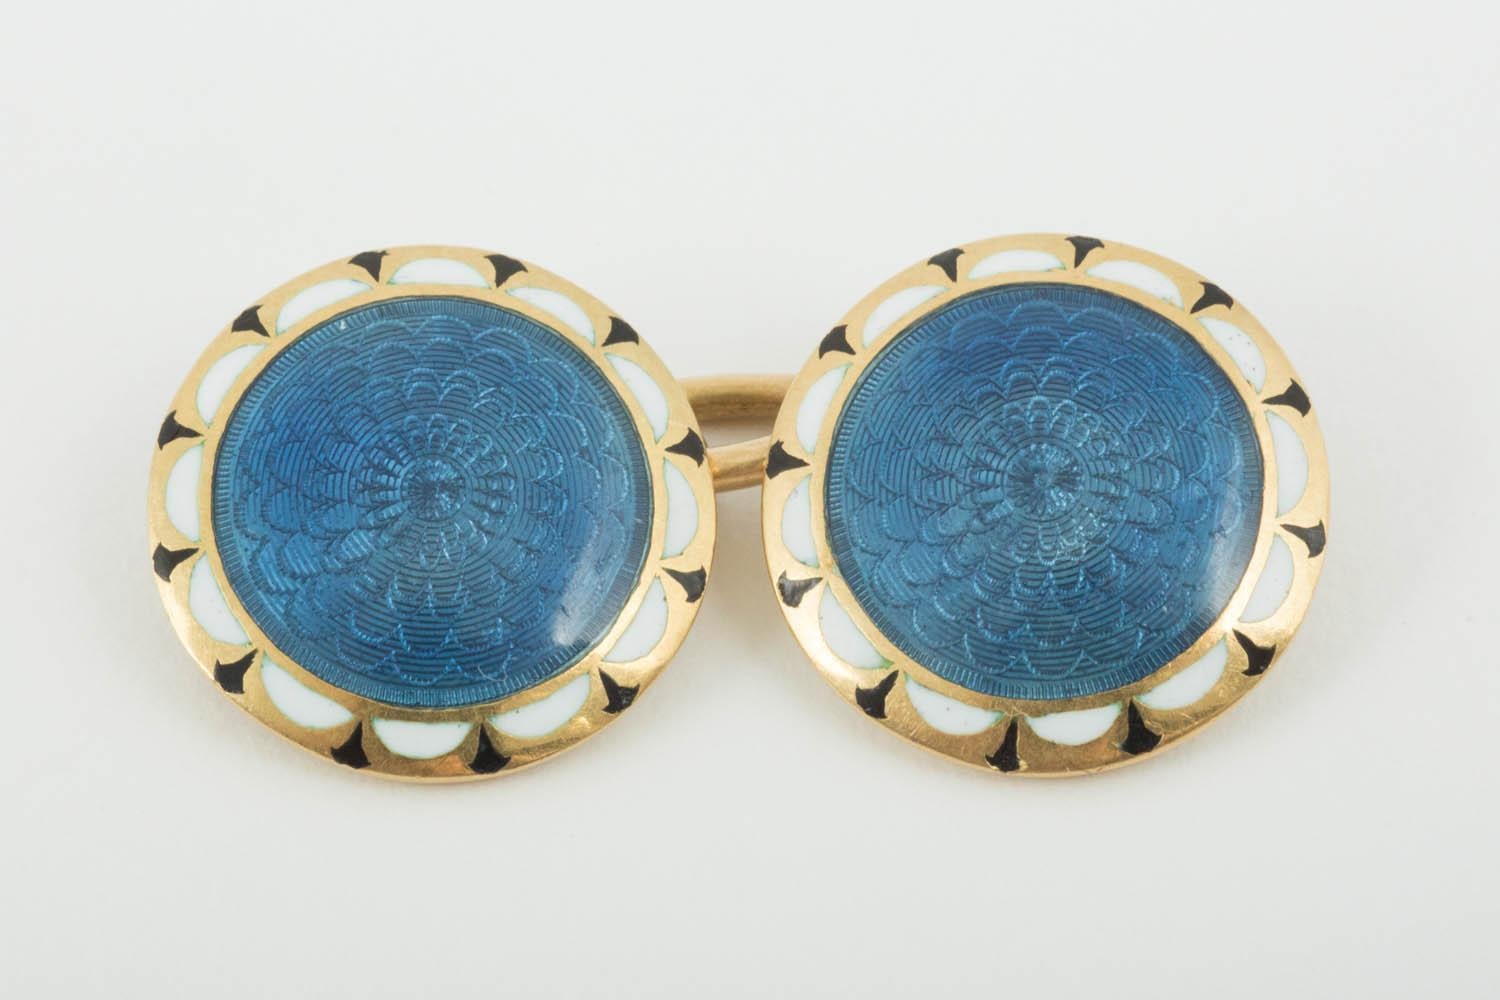 Pair of 18 carat yellow gold [stamped] double sided circular cufflinks,the face with a bright blue floral guilloche enamel,bordered with black and white enamel.English circa 1910.